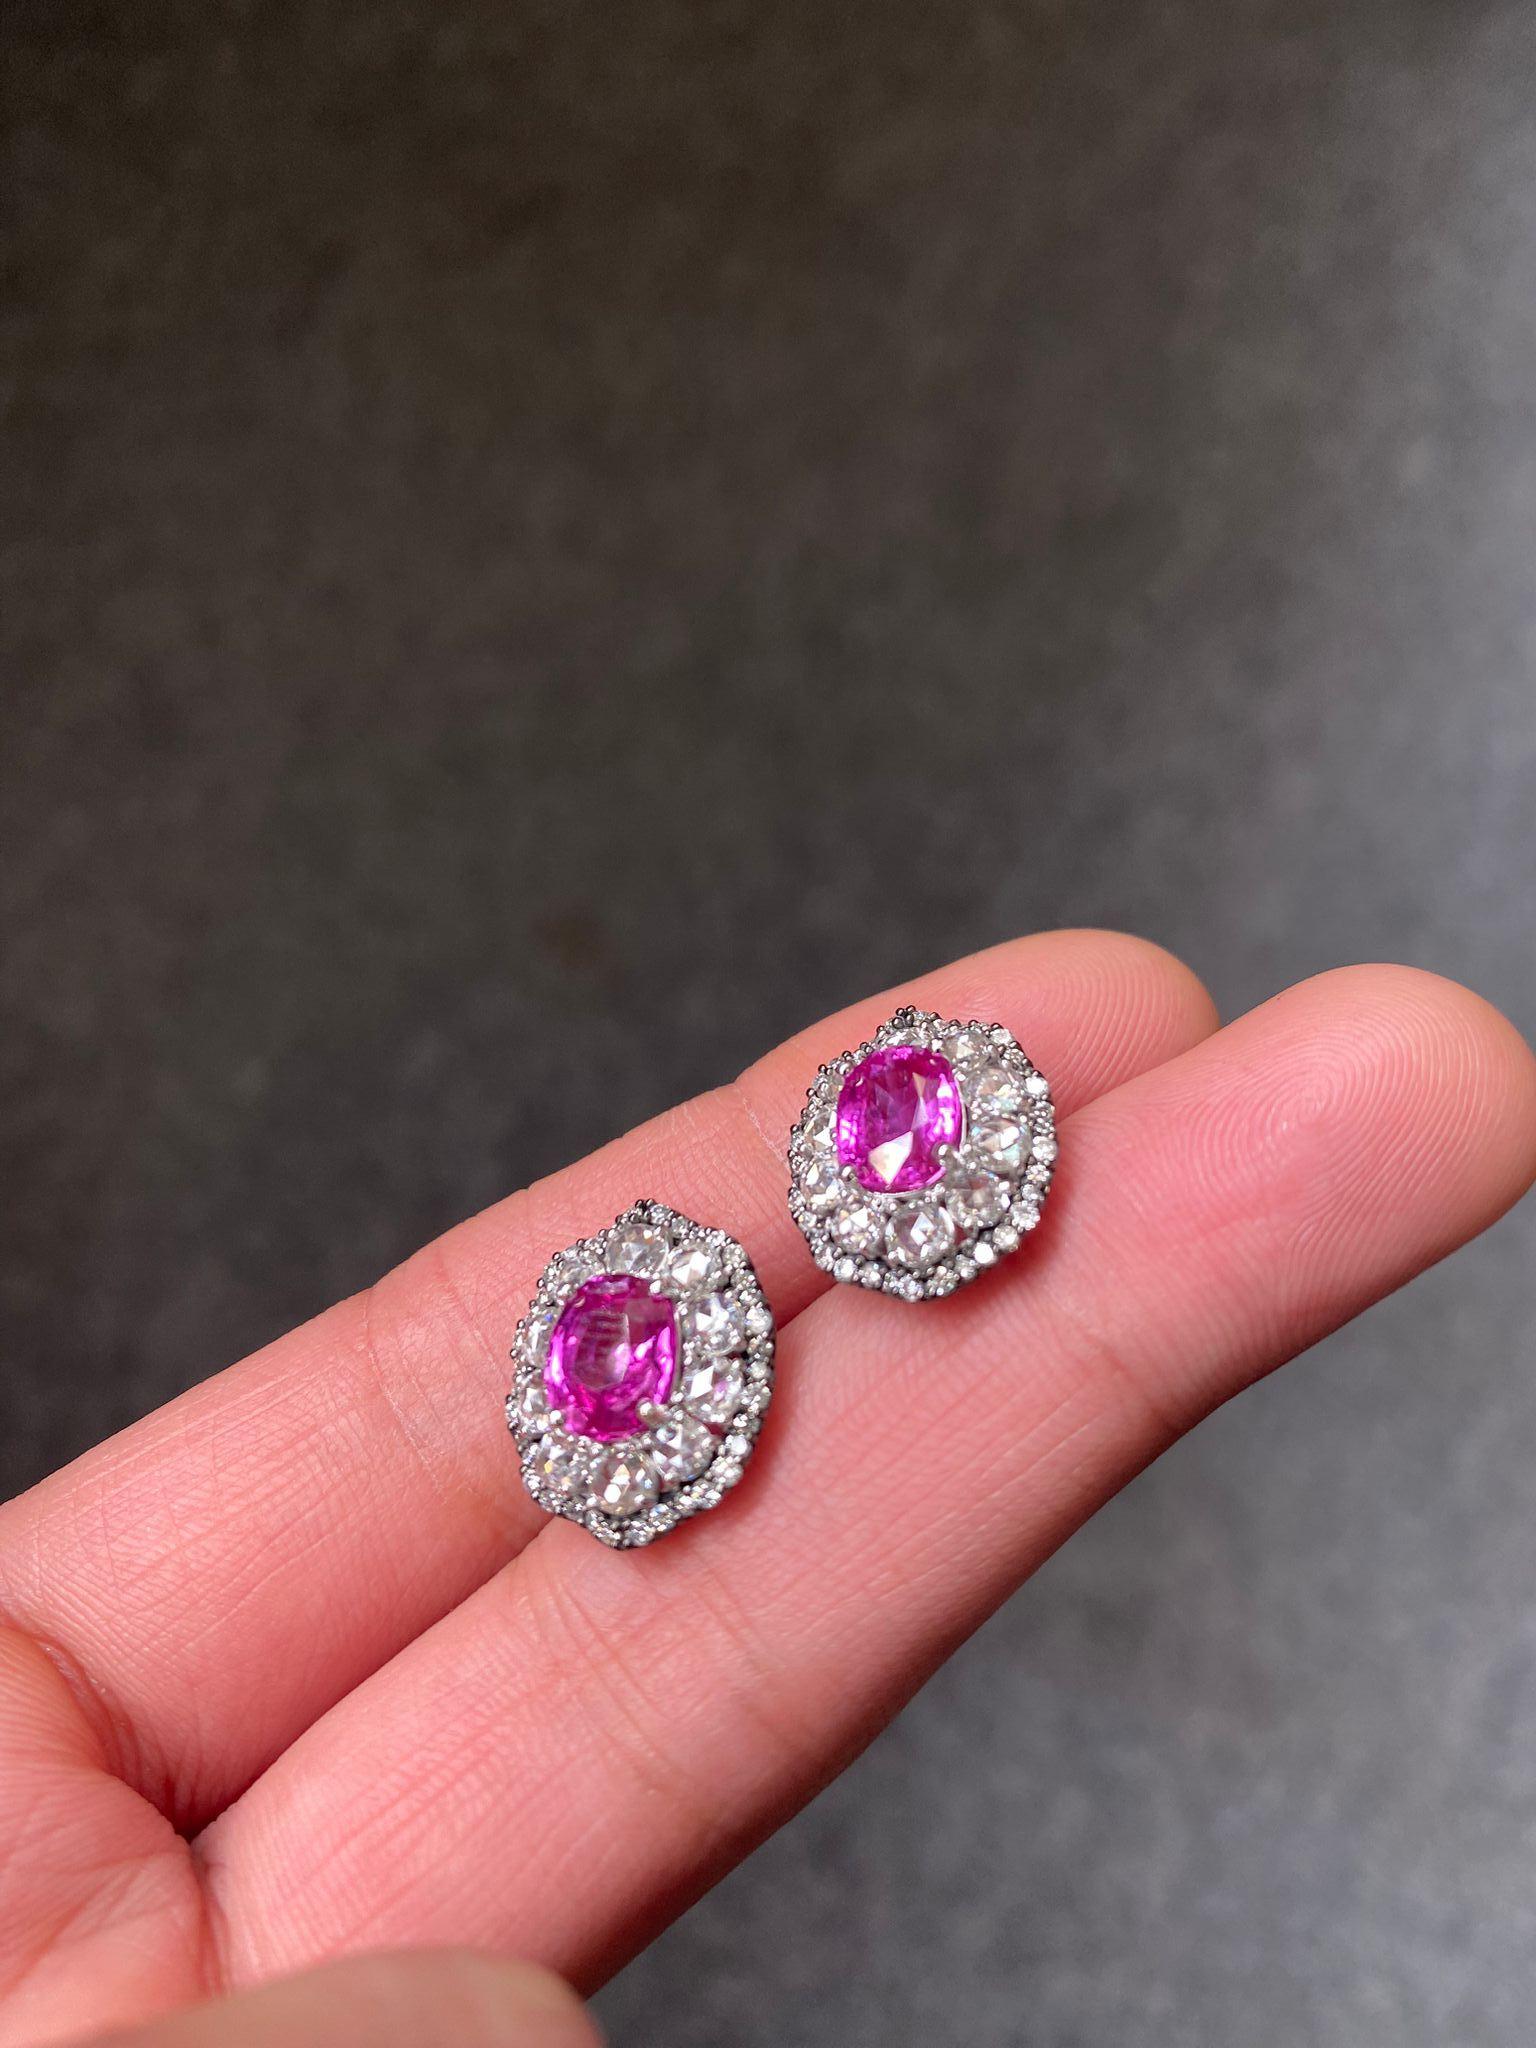 A stunning pair of 3.10 carat Pink Sapphire, originating from Burma - absolutely natural with no treatments, adorned with 1.43 carat rose cut White Diamonds and 0.54 carat round White Diamonds. The design of the earrings are very unique, the black